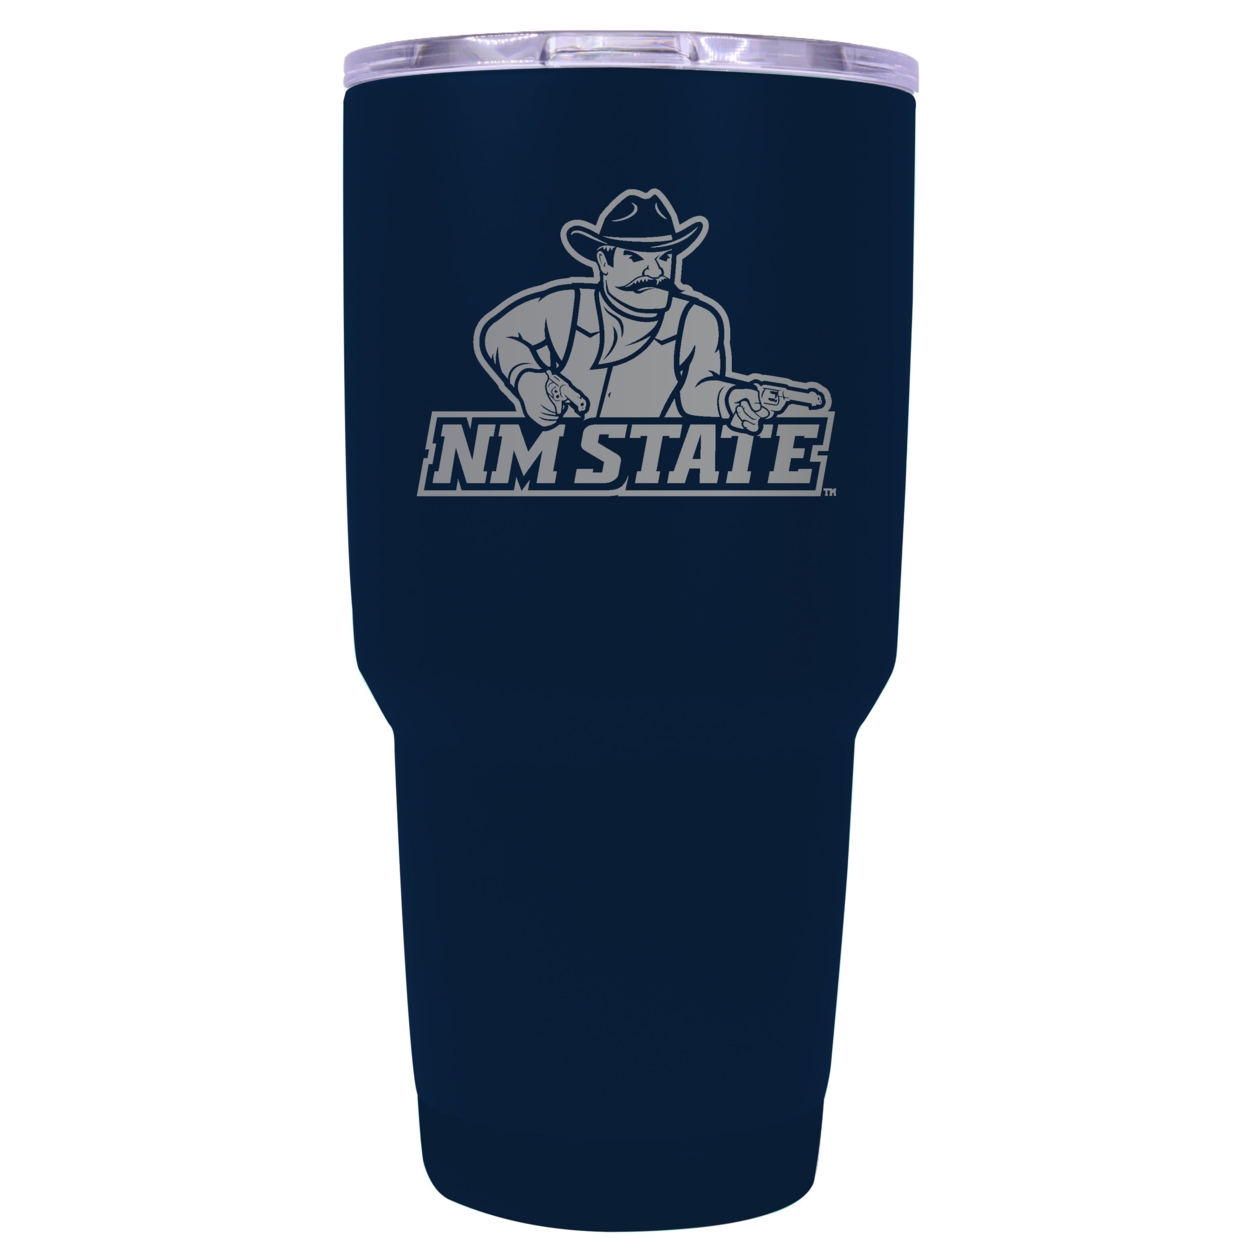 New Mexico State University Pistol Pete 24 Oz Laser Engraved Stainless Steel Insulated Tumbler - Choose Your Color. - Seafoam